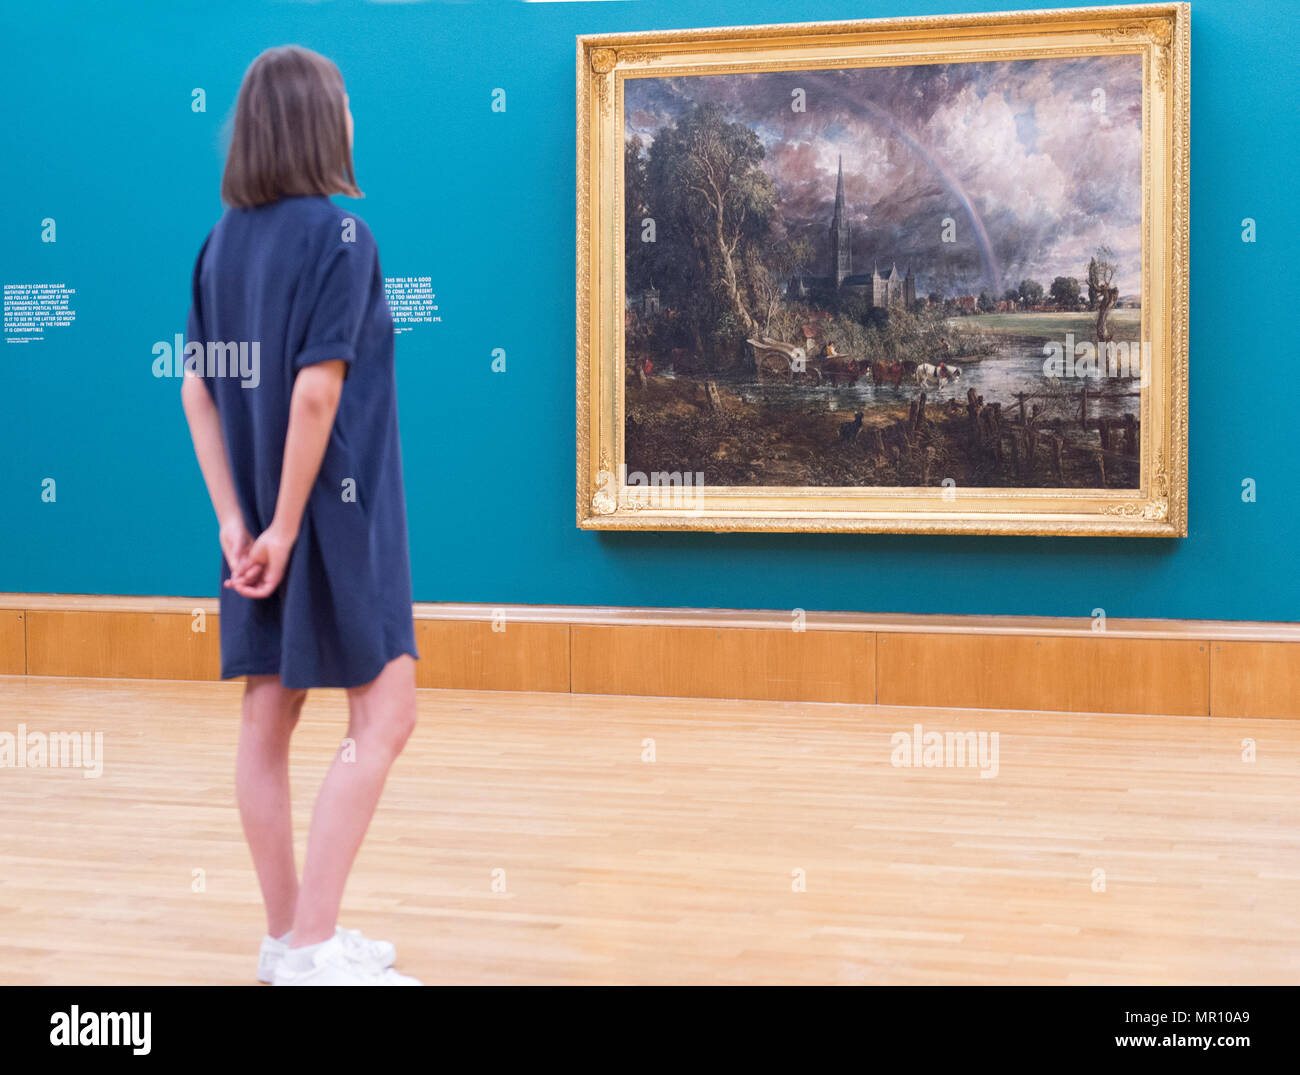 Tate Britain, London, UK. 25 May, 2018. Constable’s Salisbury Cathedral from the Meadows 1831 is shown alongside Turner’s Caligula’s Palace and Bridge, also 1831, in a new display, Fire and Water, marking the first pairing of these two works since they were exhibited over 180 years ago. Credit: Malcolm Park/Alamy Live News. Stock Photo